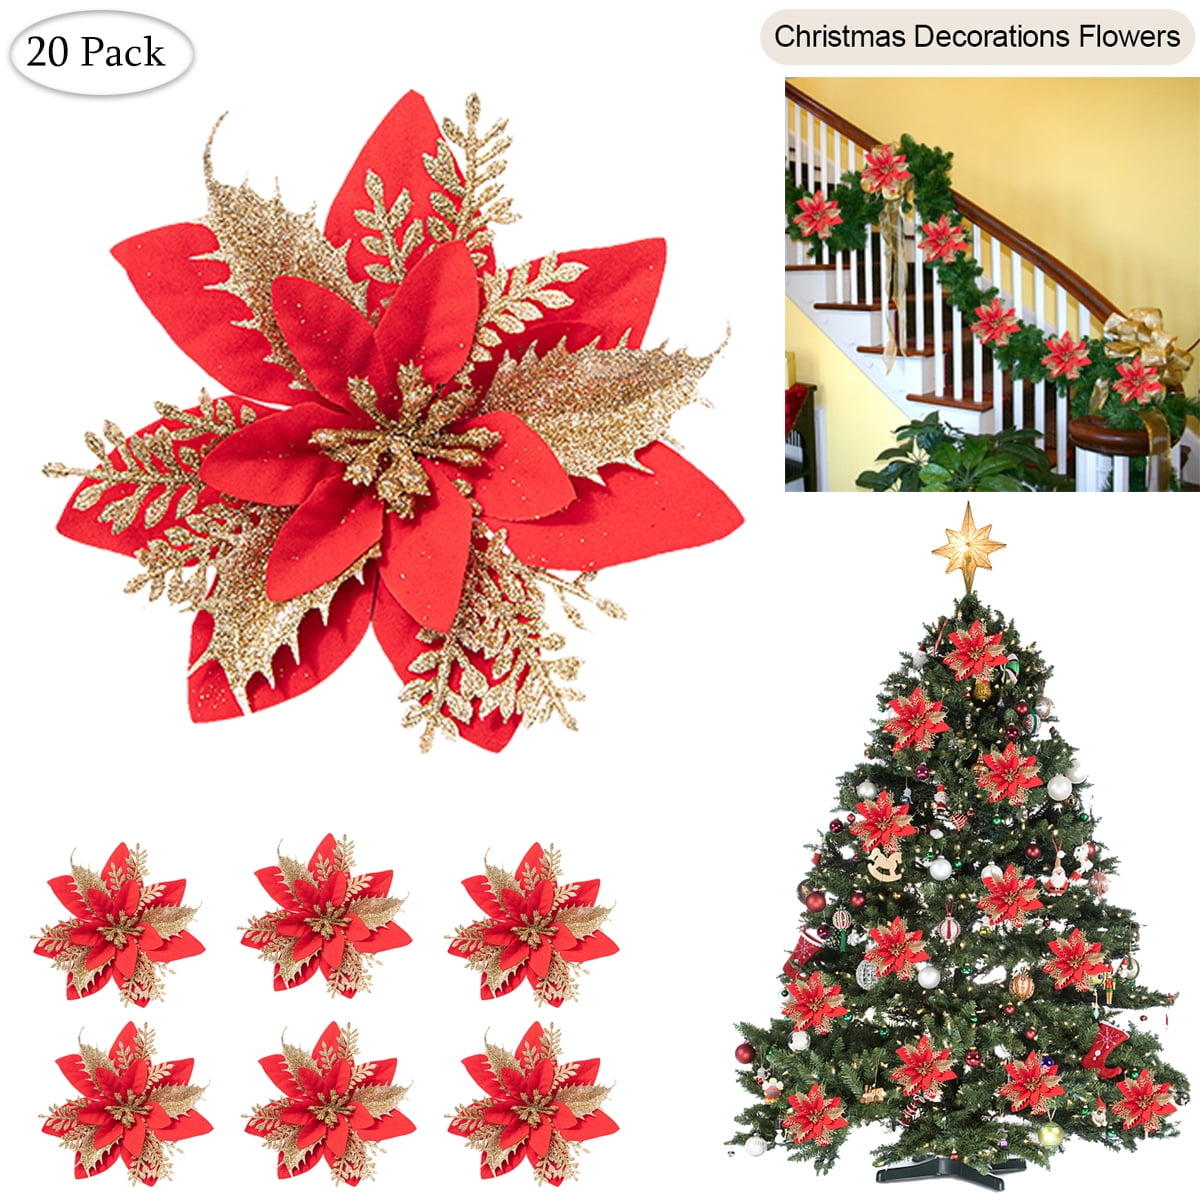 Sixtyshades 24 Pcs Poinsettia Artificial Christmas Flowers Decorations Glitter Xmas Tree Flower Ornaments (Red), Size: 6.3